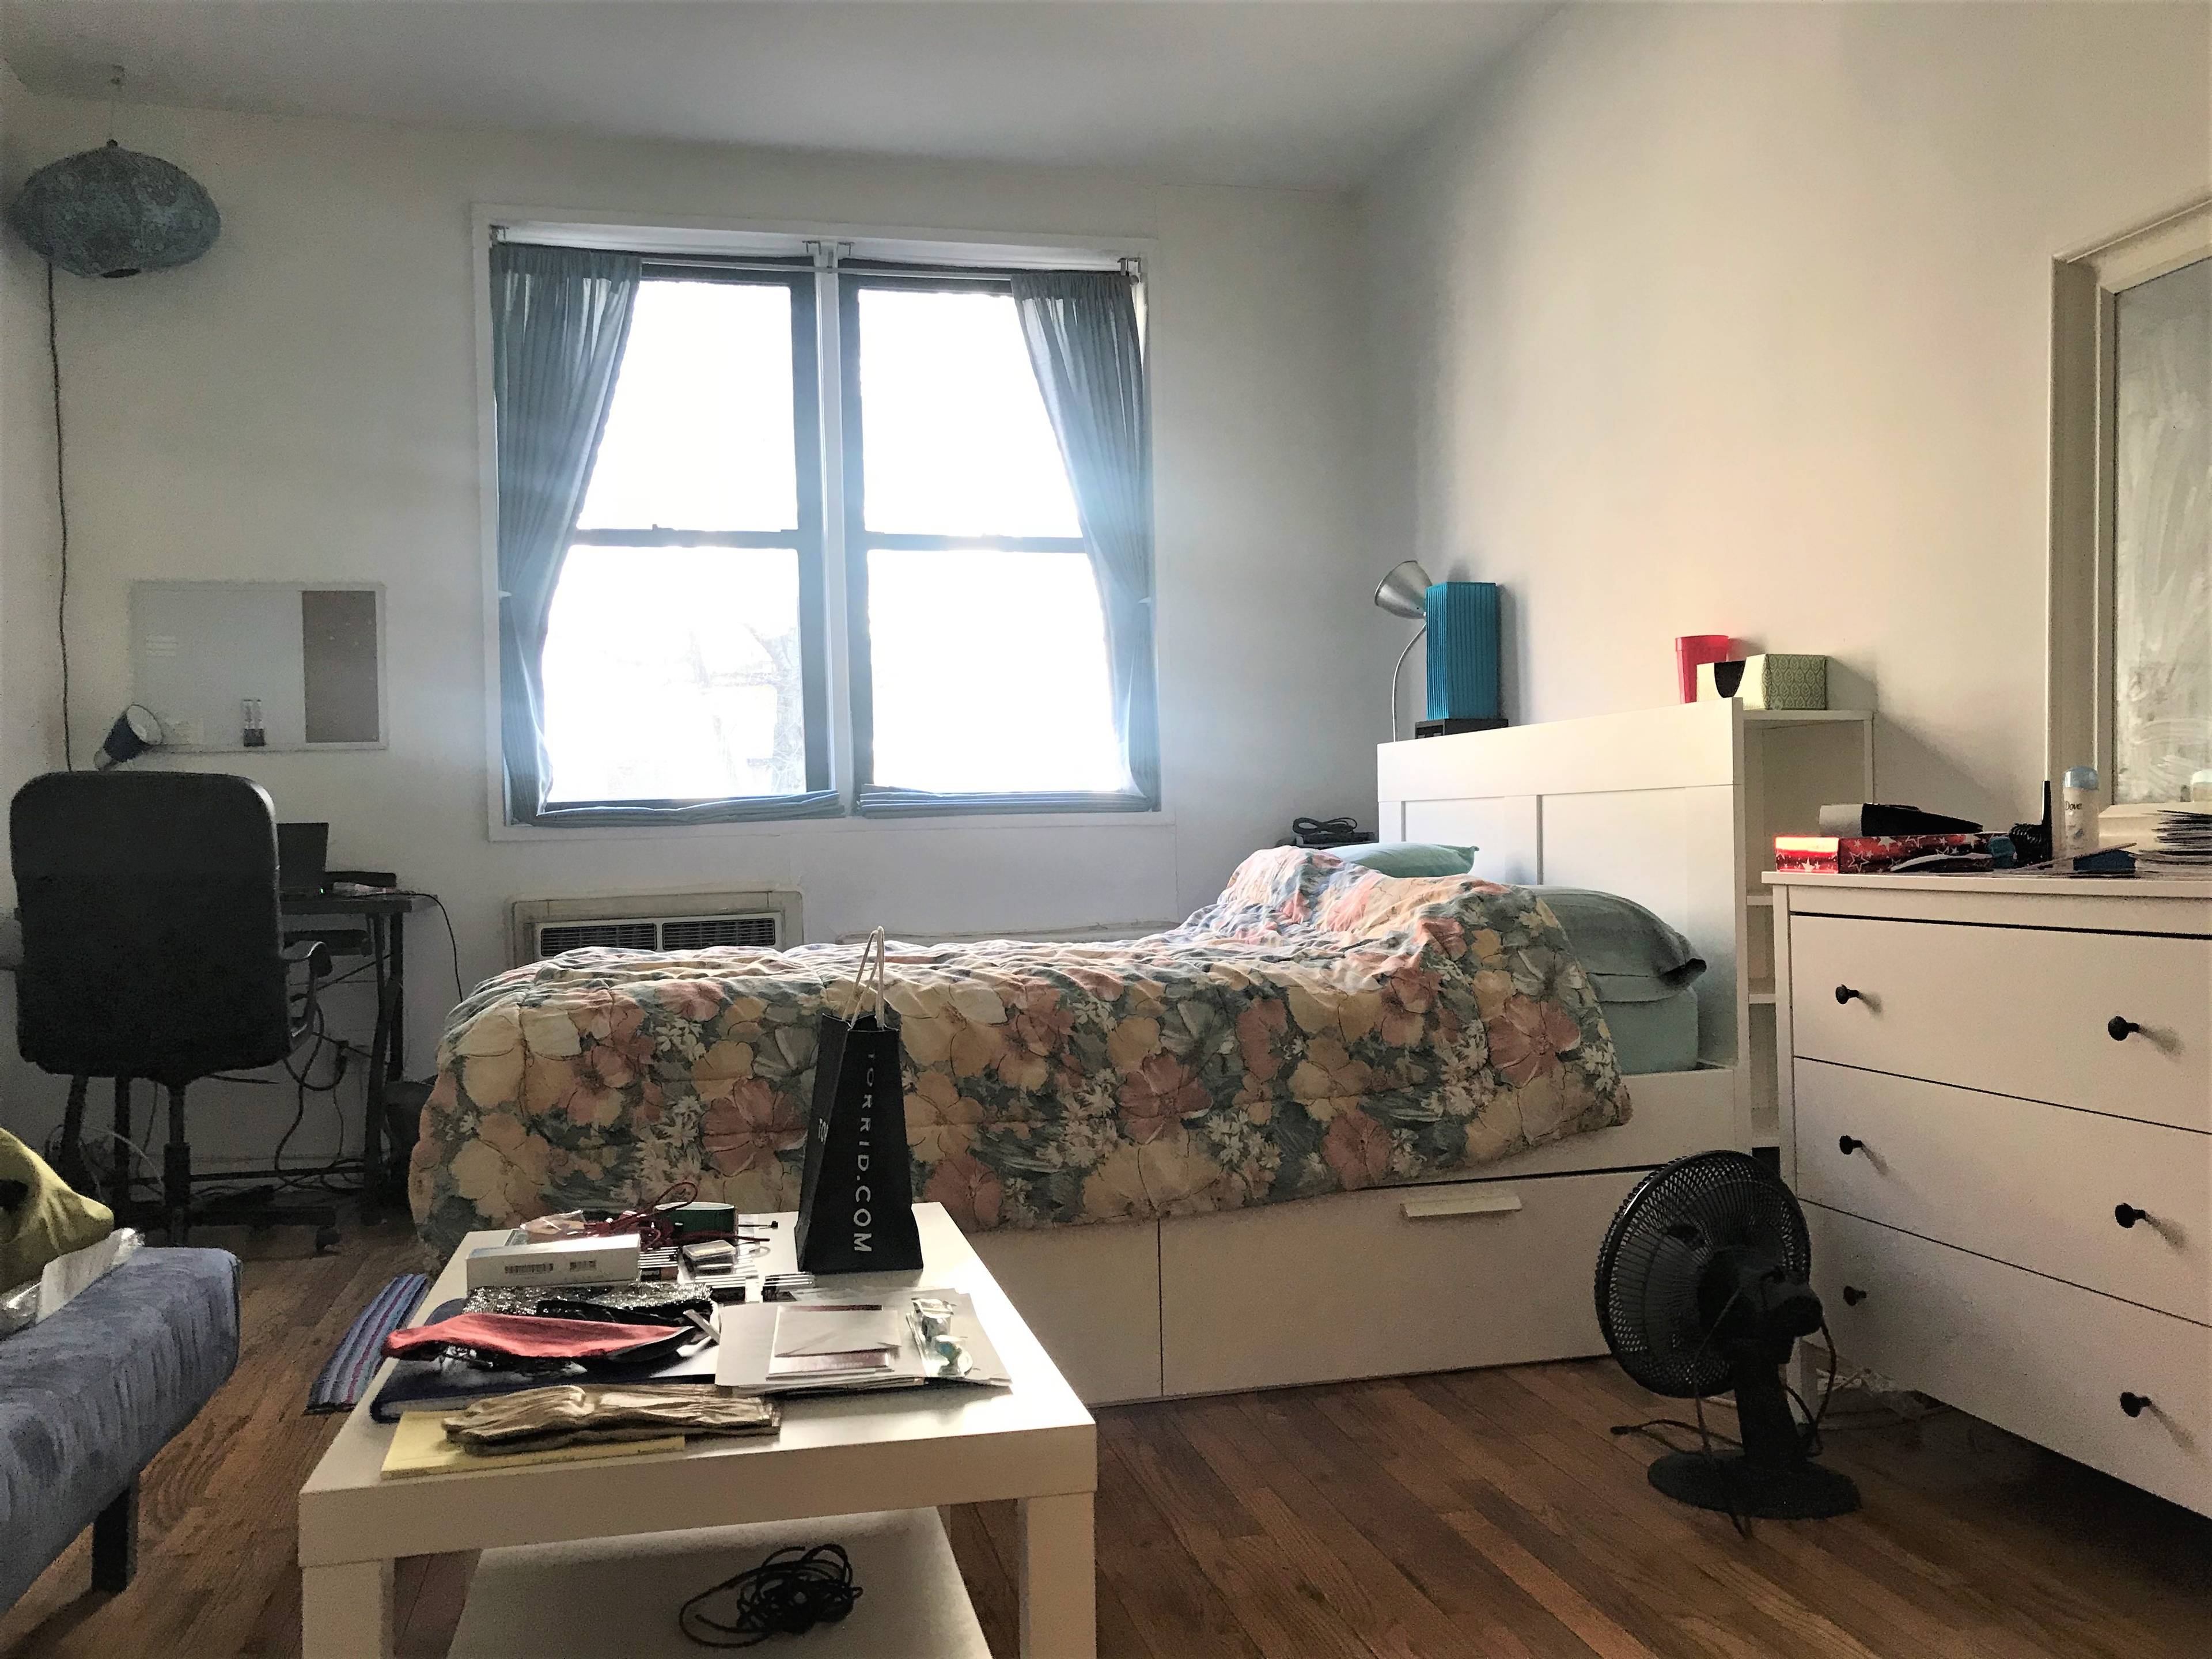 [UES] - ONE MONTH FREE, Oversized Studio, Large Separate Kitchen, High Ceilings, Pet Friendly, Laundry